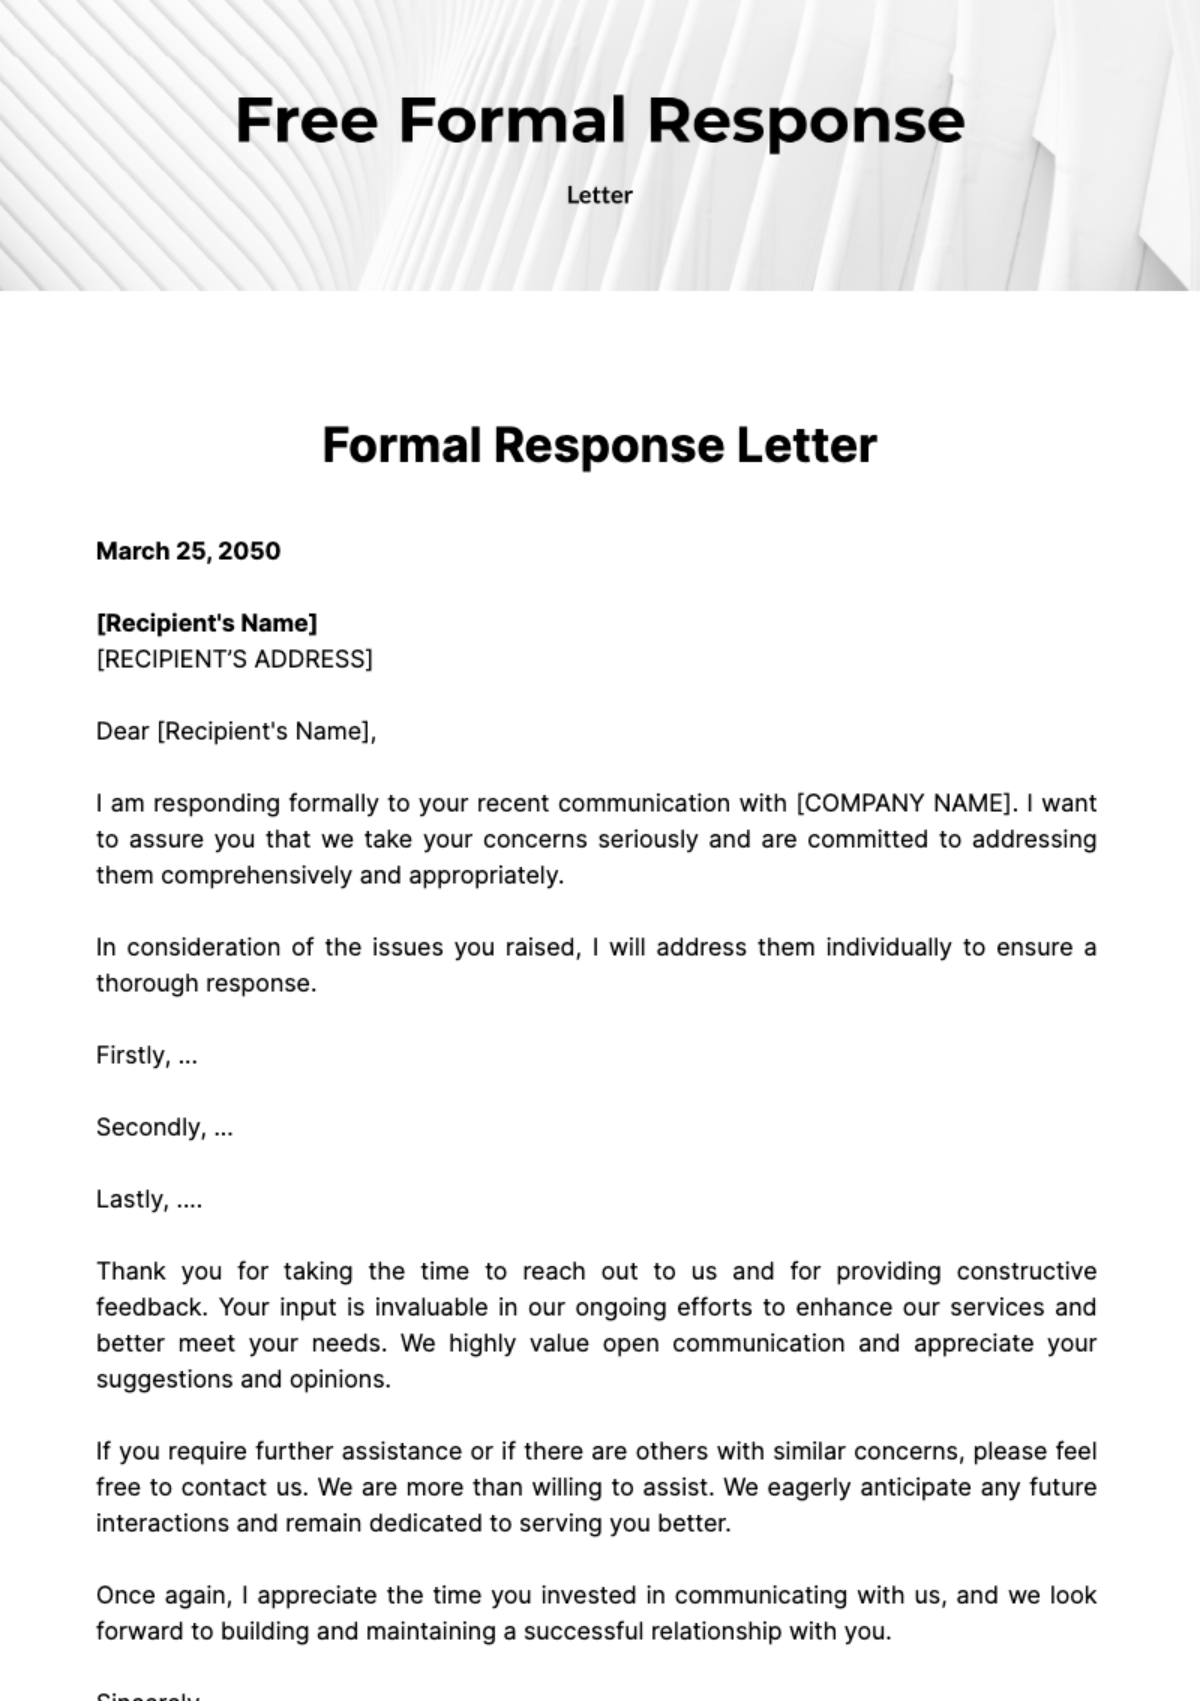 Free Formal Response Letter Template